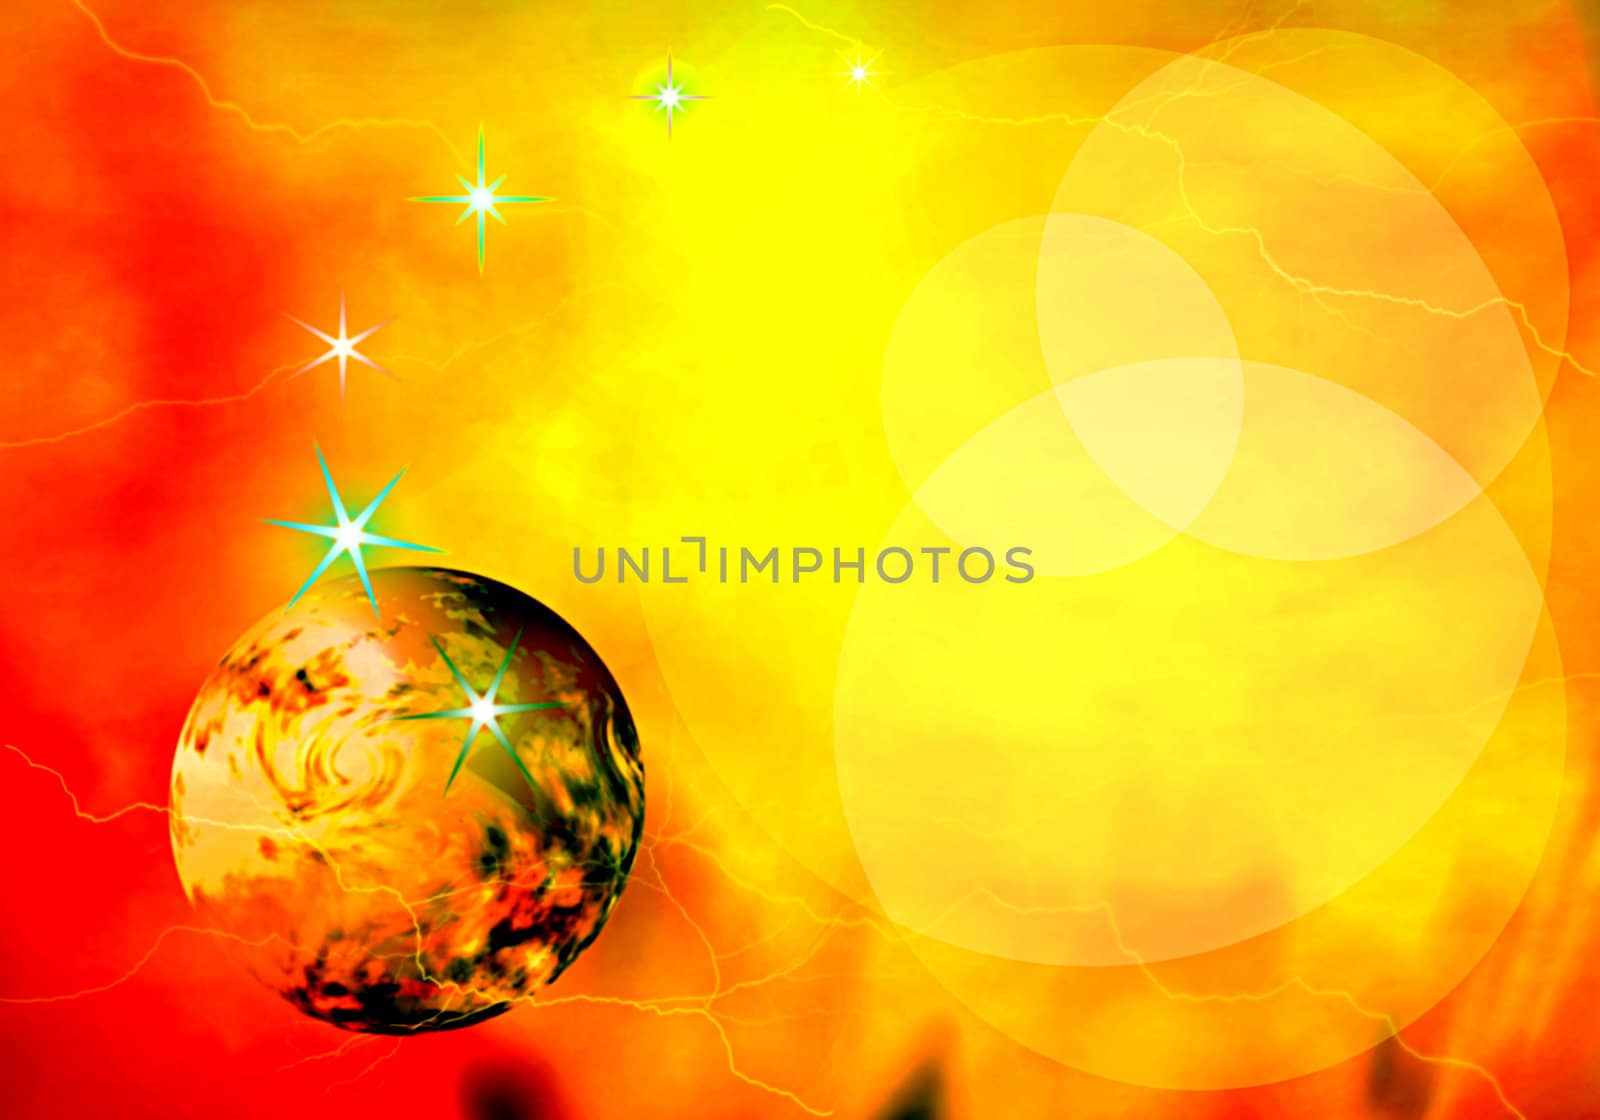 abstract symbolic image of a single planet in space